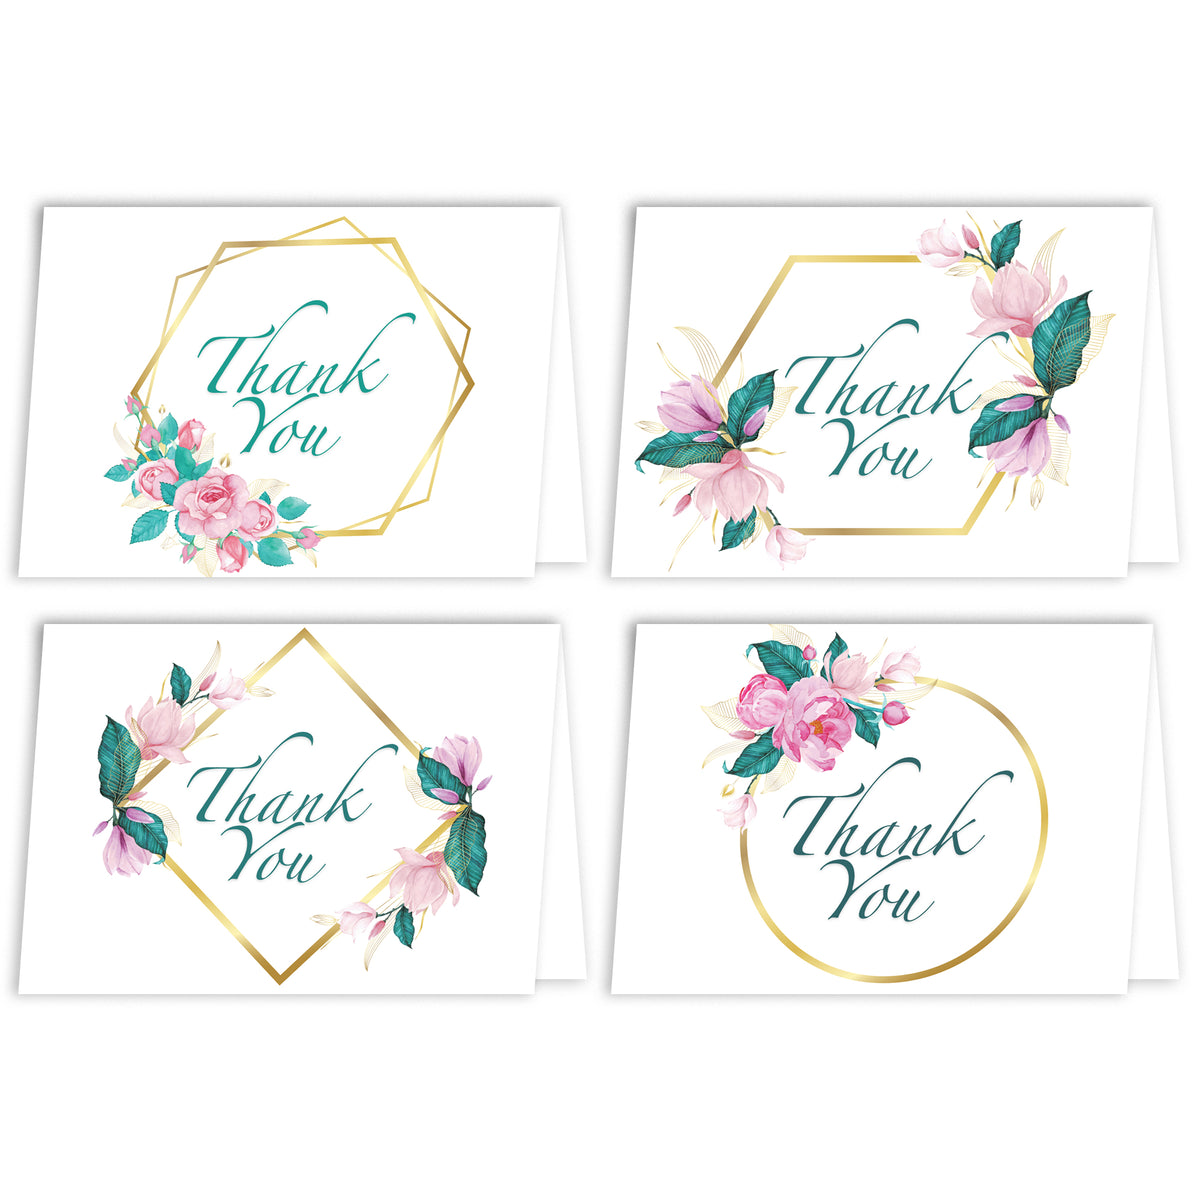 Pre-Printed Folded A1 Thank you Cards and Envelopes - 25 pack